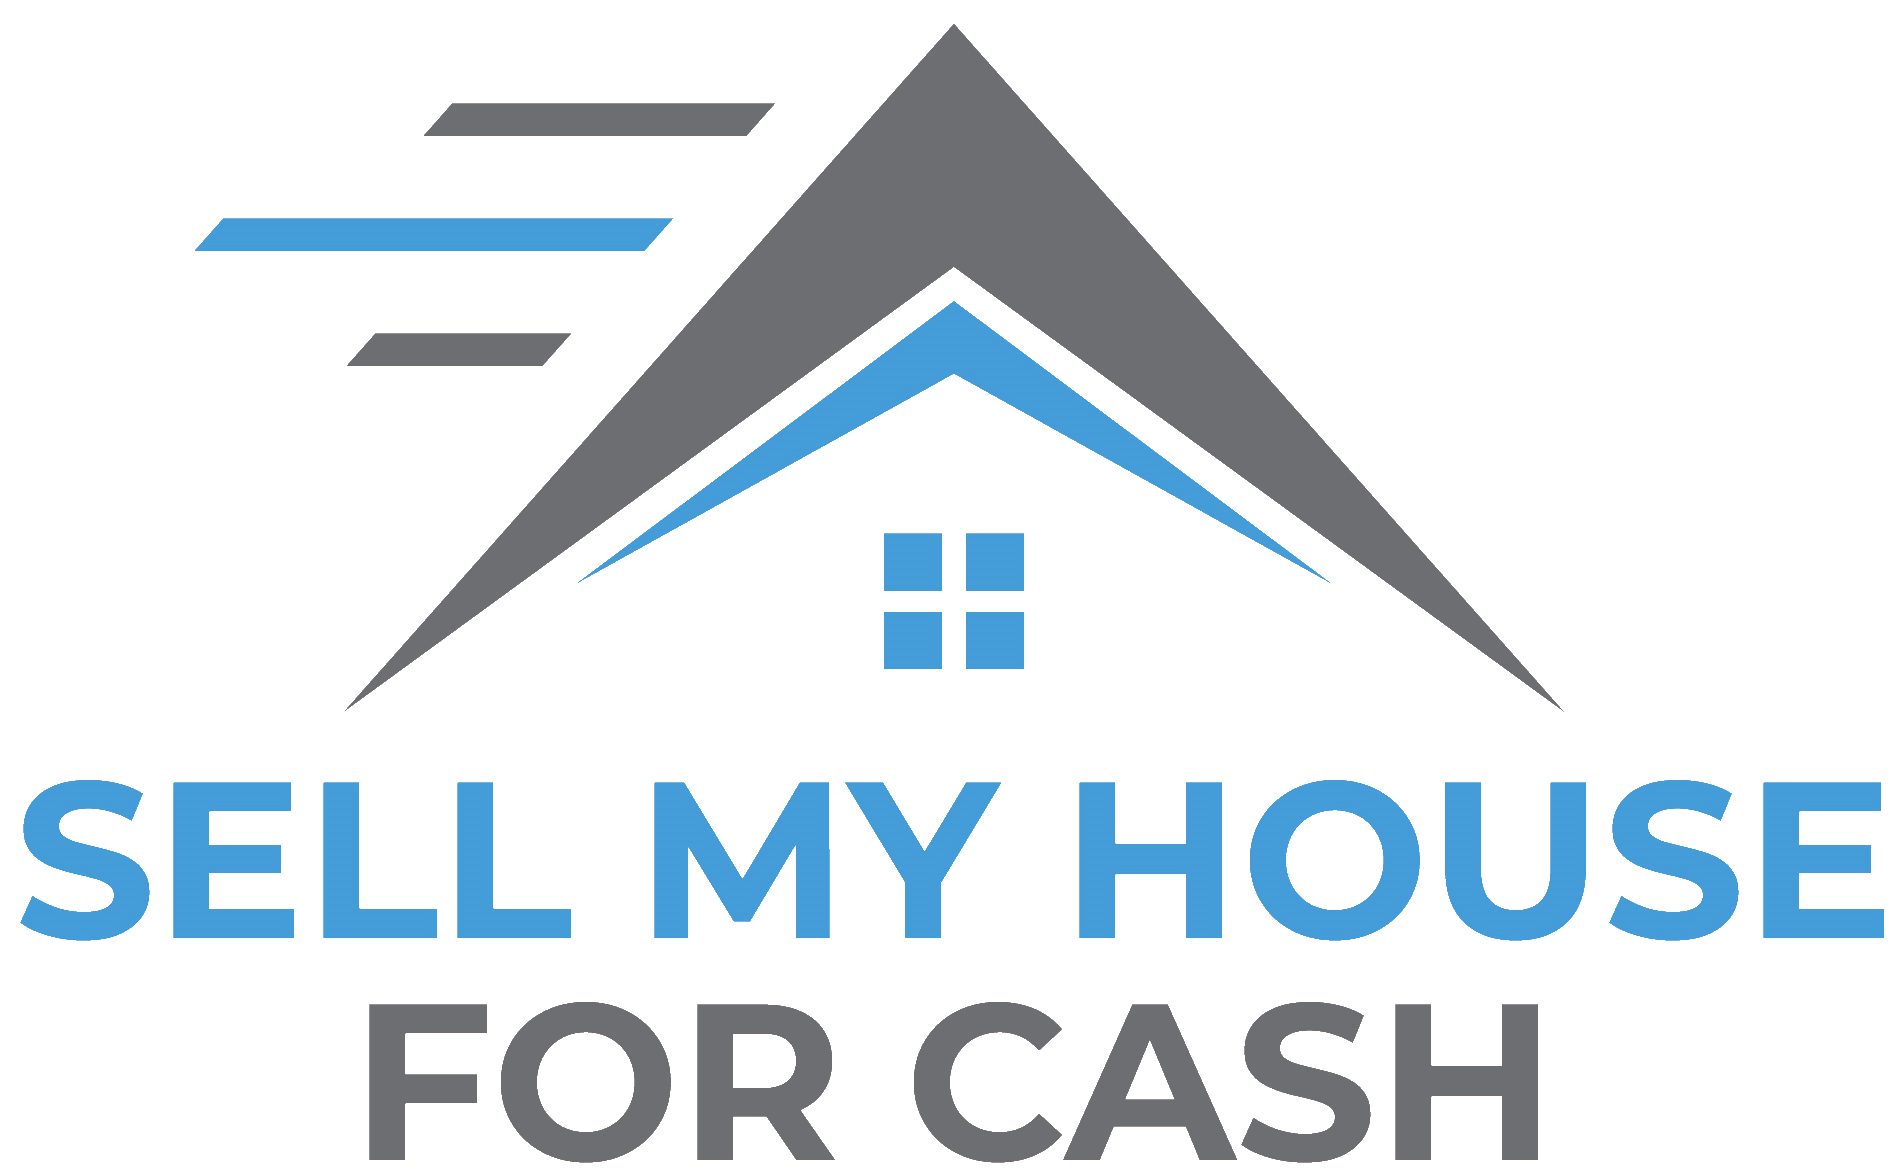 Sell My House For Cash TX logo